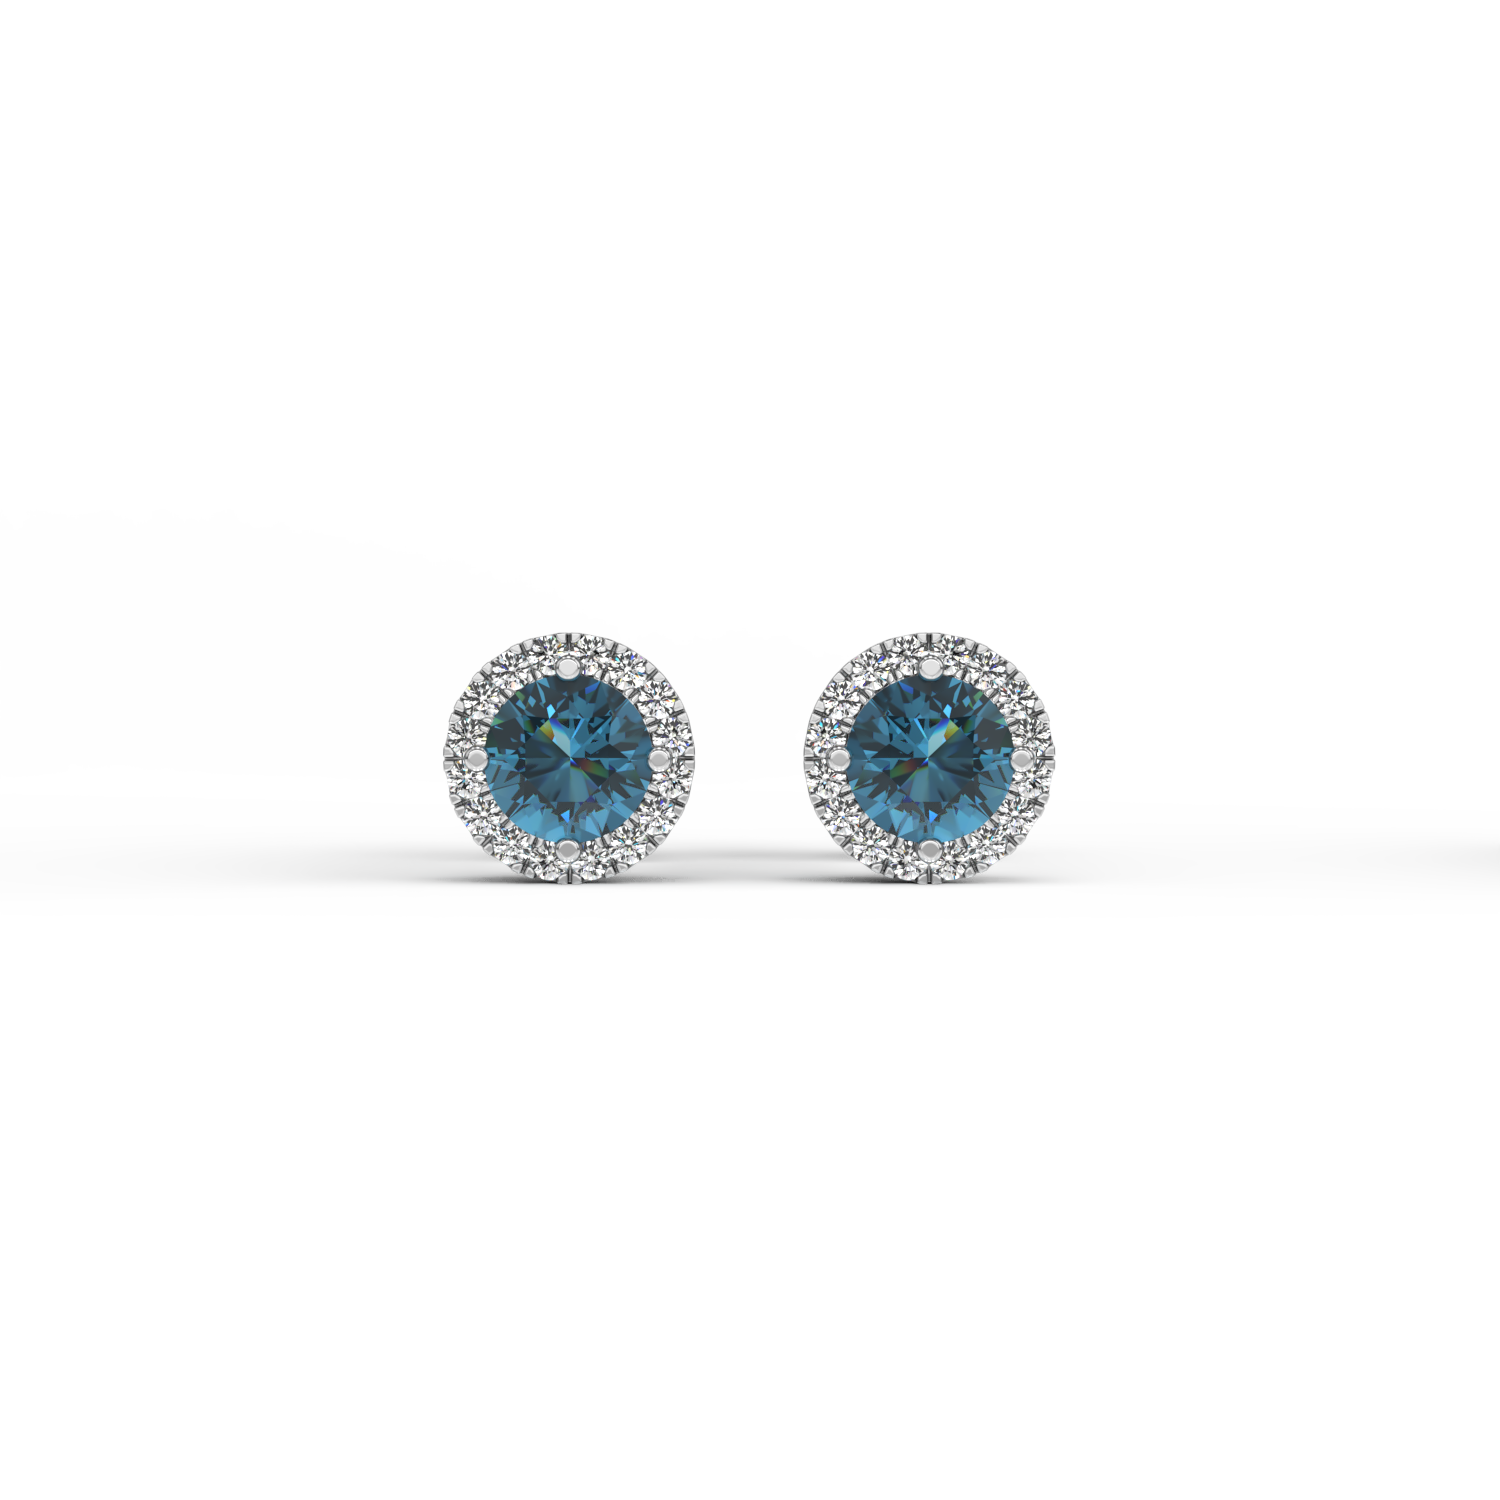 18K white gold earrings with 1.02ct blue diamonds and 0.15ct clear diamonds